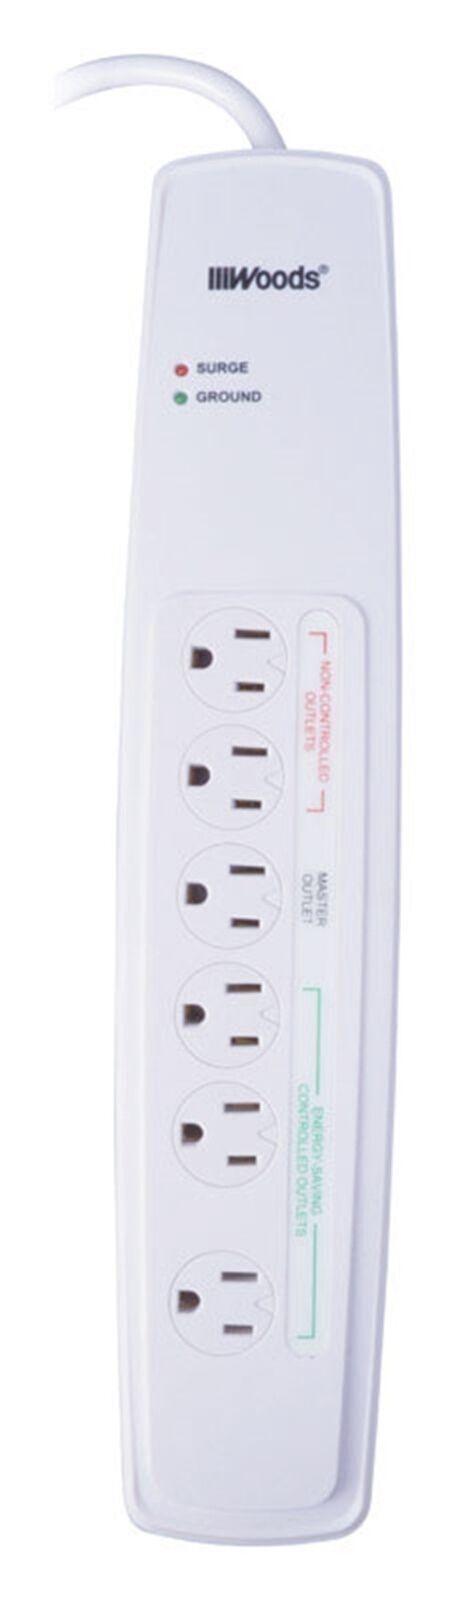 Woods 417047810 White 110V 1500 Joules 6-Outlet Surge Protector 3 L ft. Cord